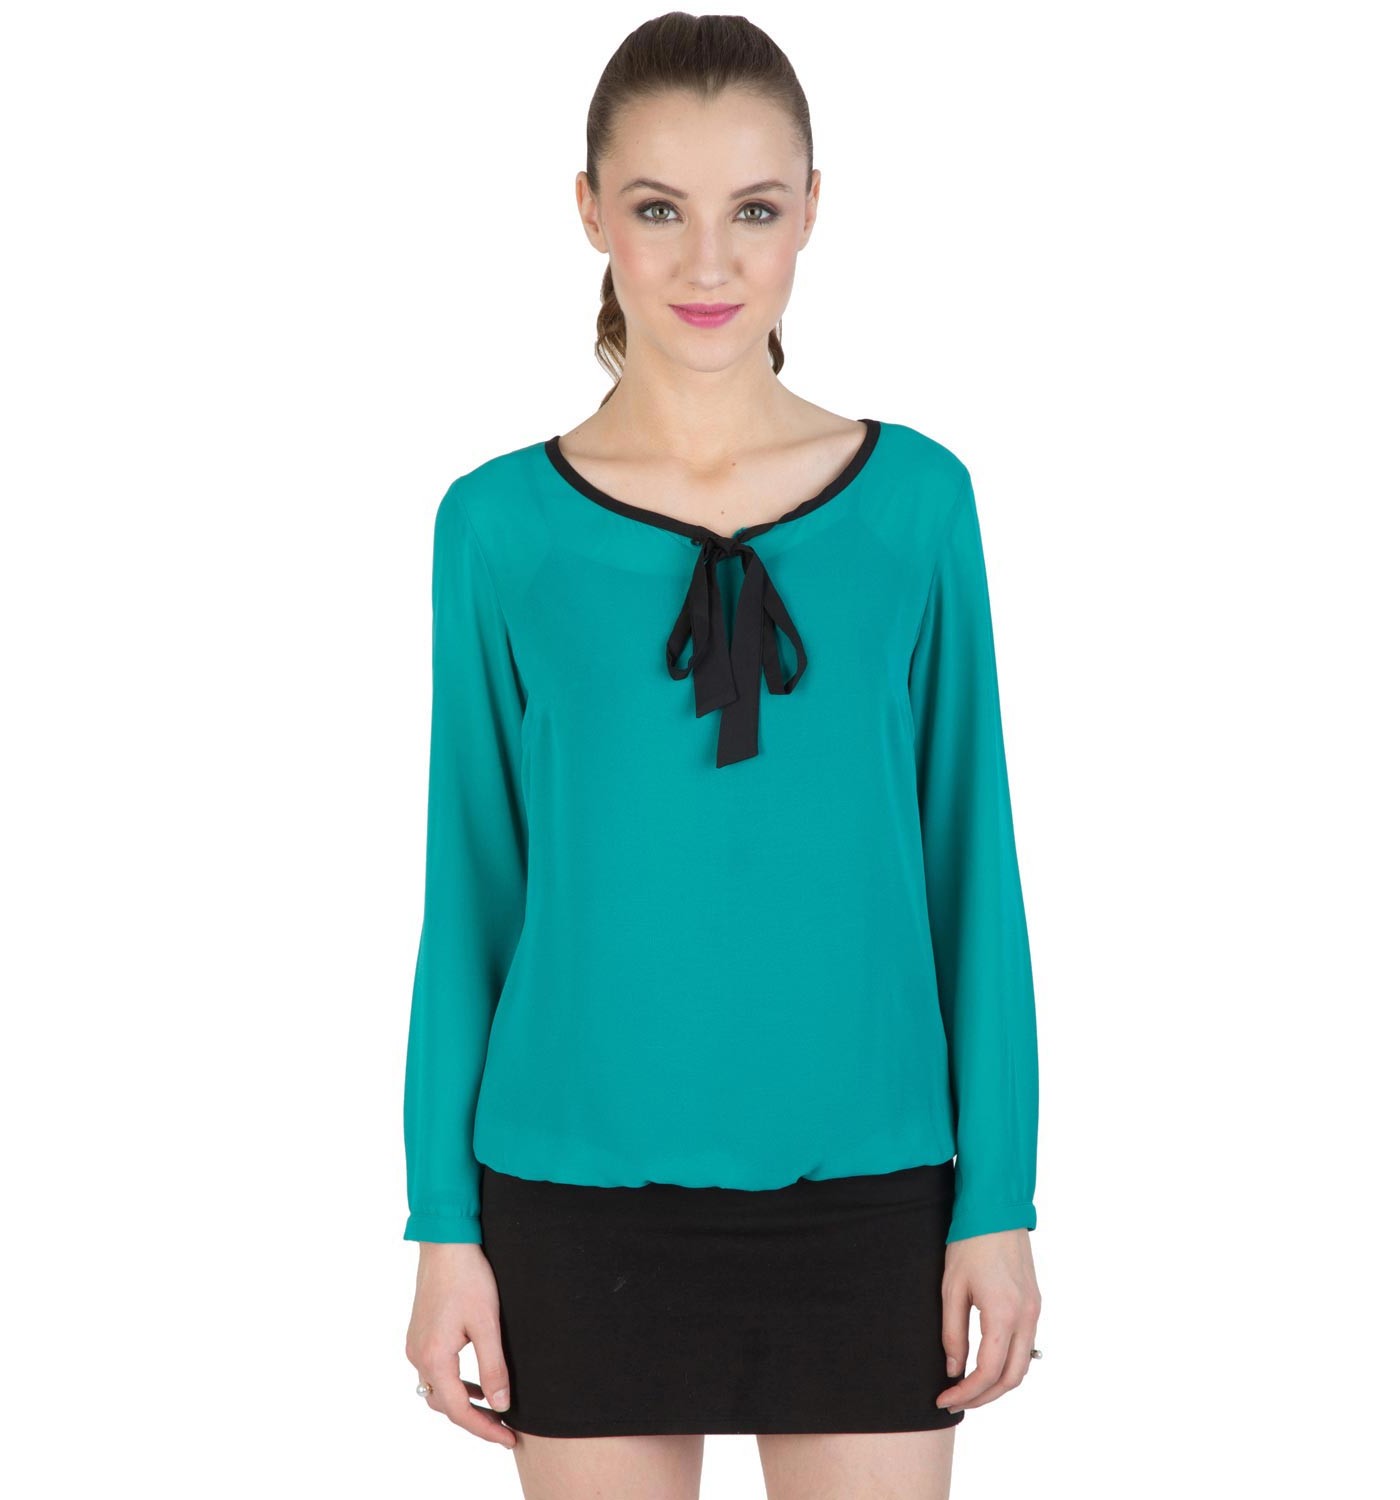 Vibe Solid Green Tops - Tops/Tunic - Uppers